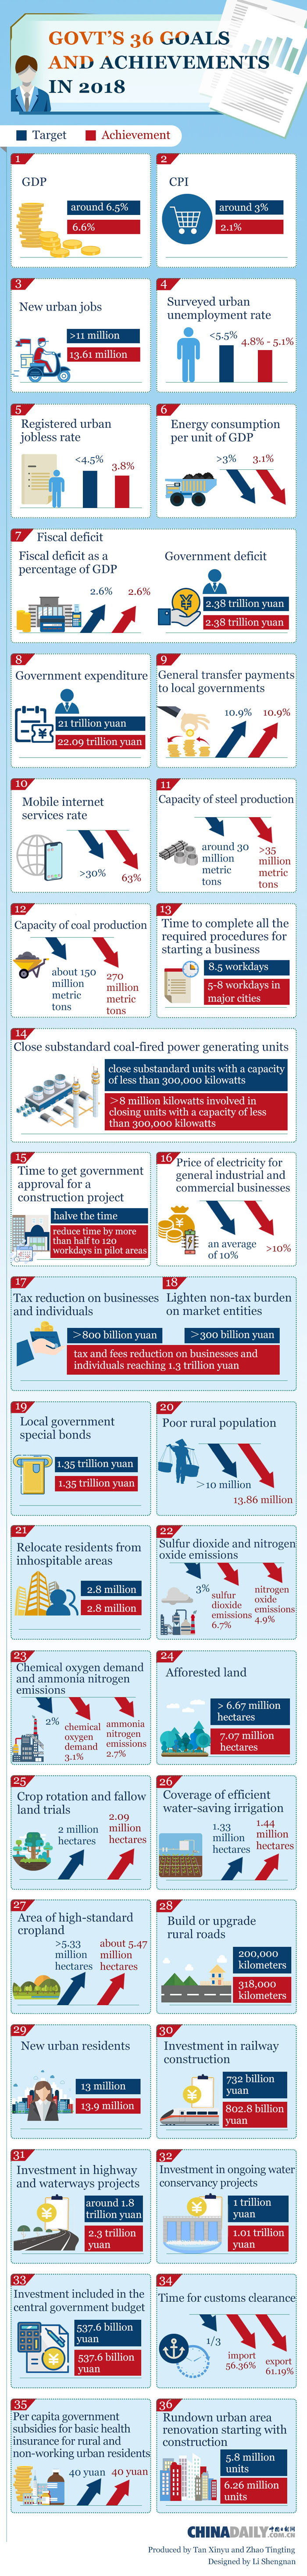 Govt's 36 goals and achievements in 2018